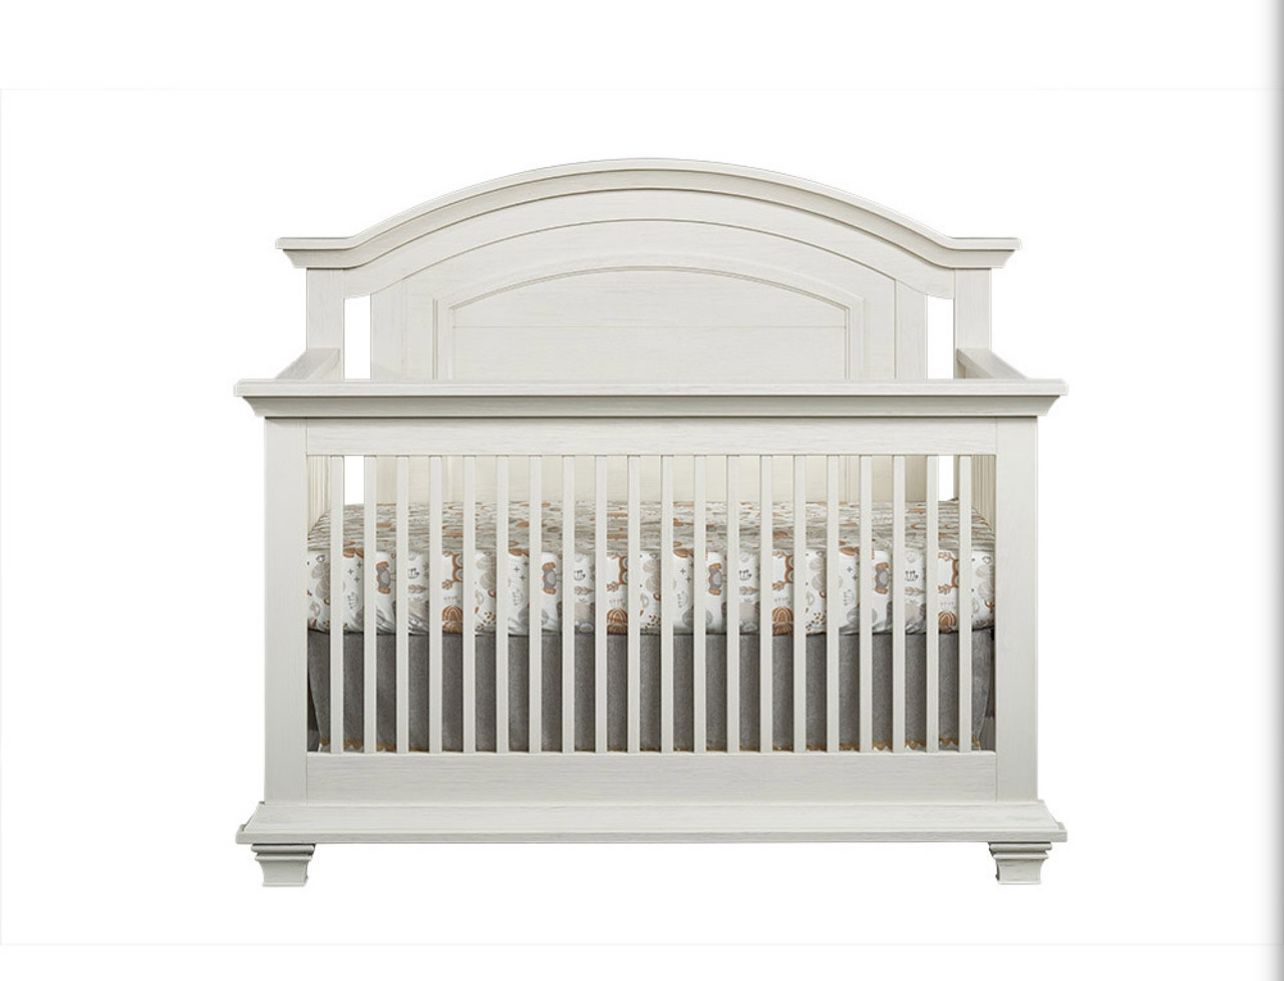 Oxford Baby Cottage Cove Crib